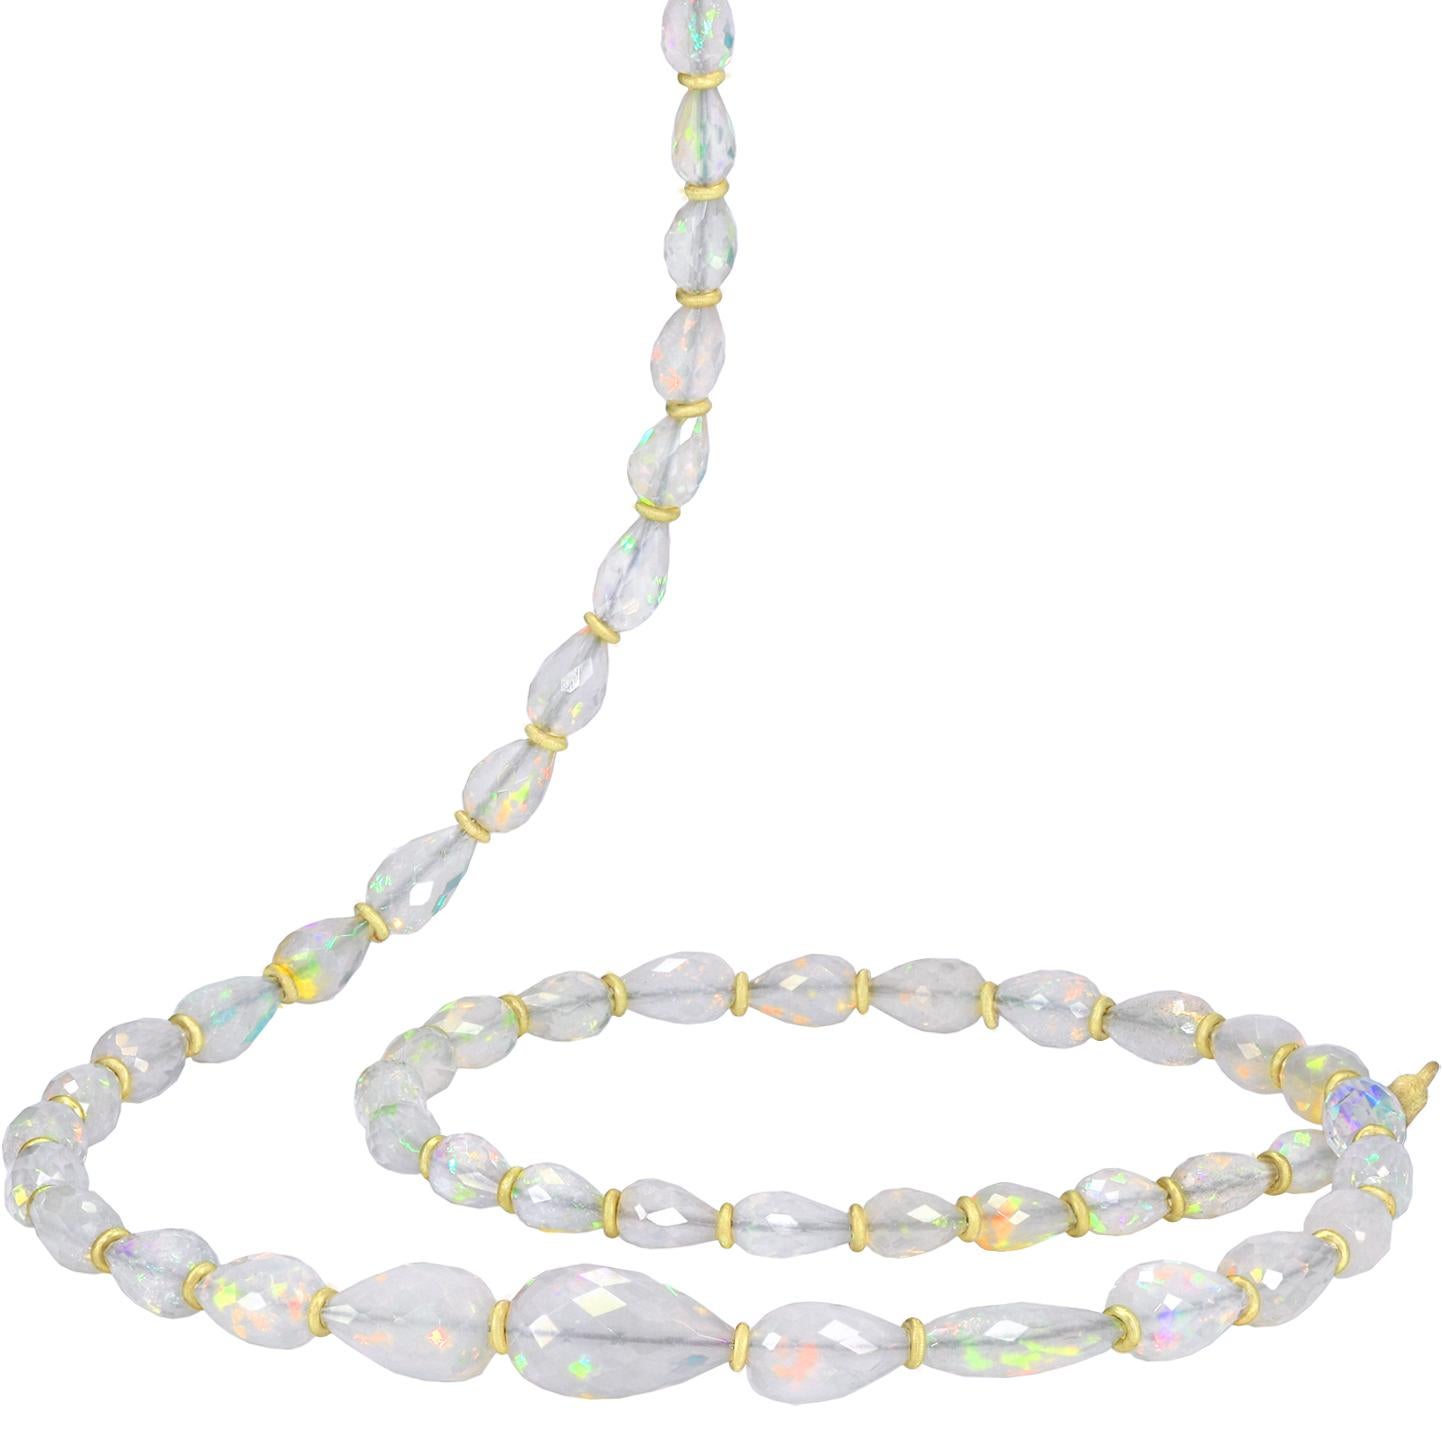 Petra Class Fiery Faceted Opal One-of-a-Kind Segments Necklace